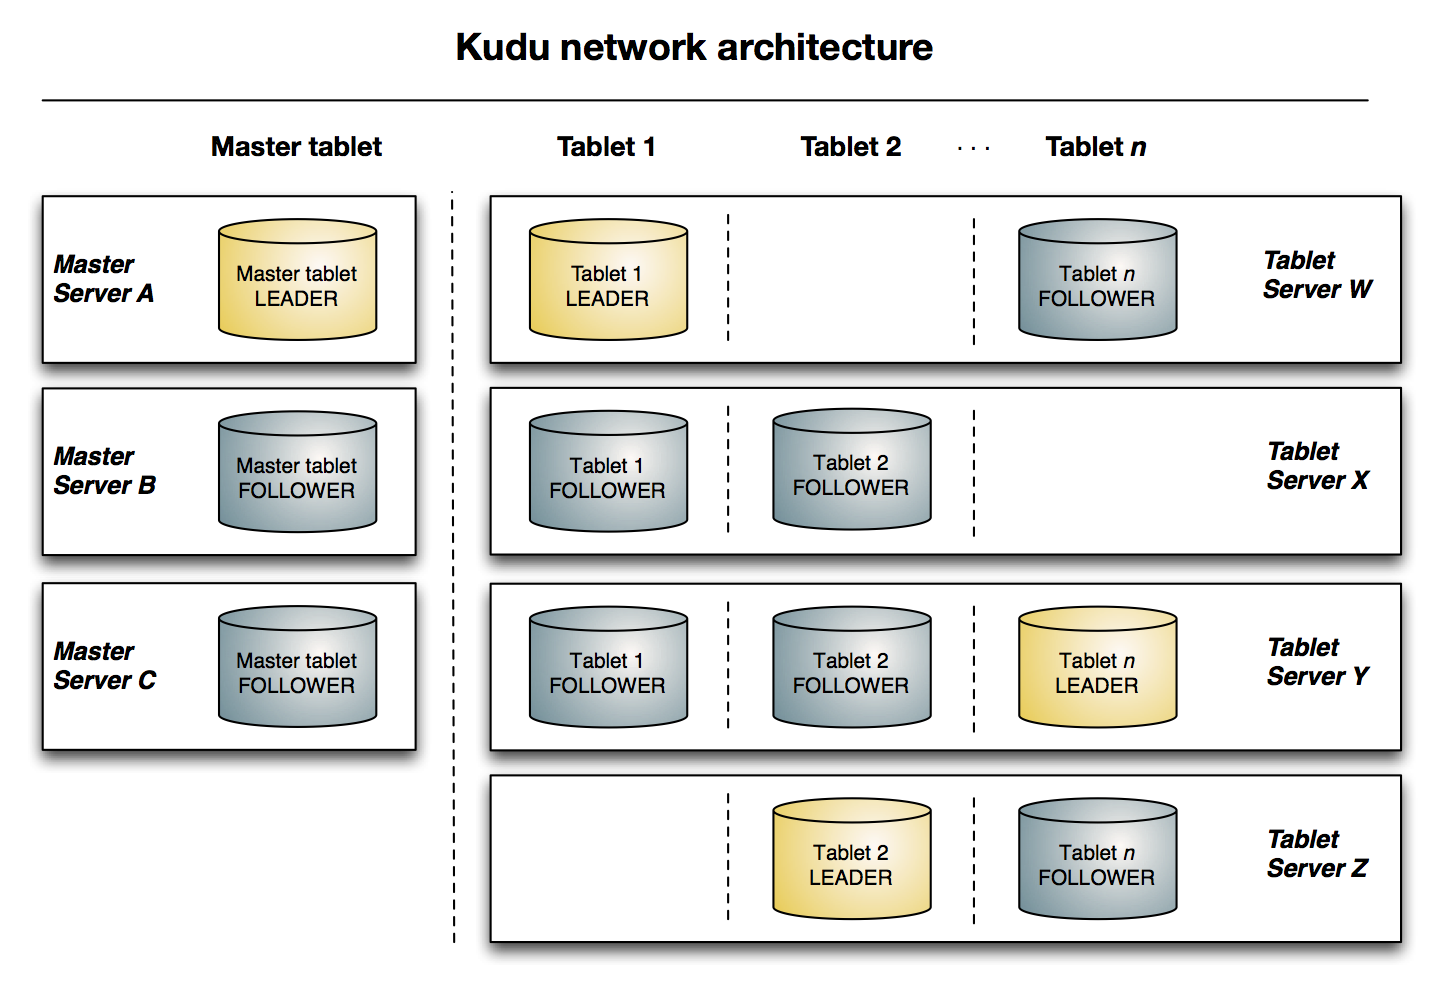 Kudu architectural overview